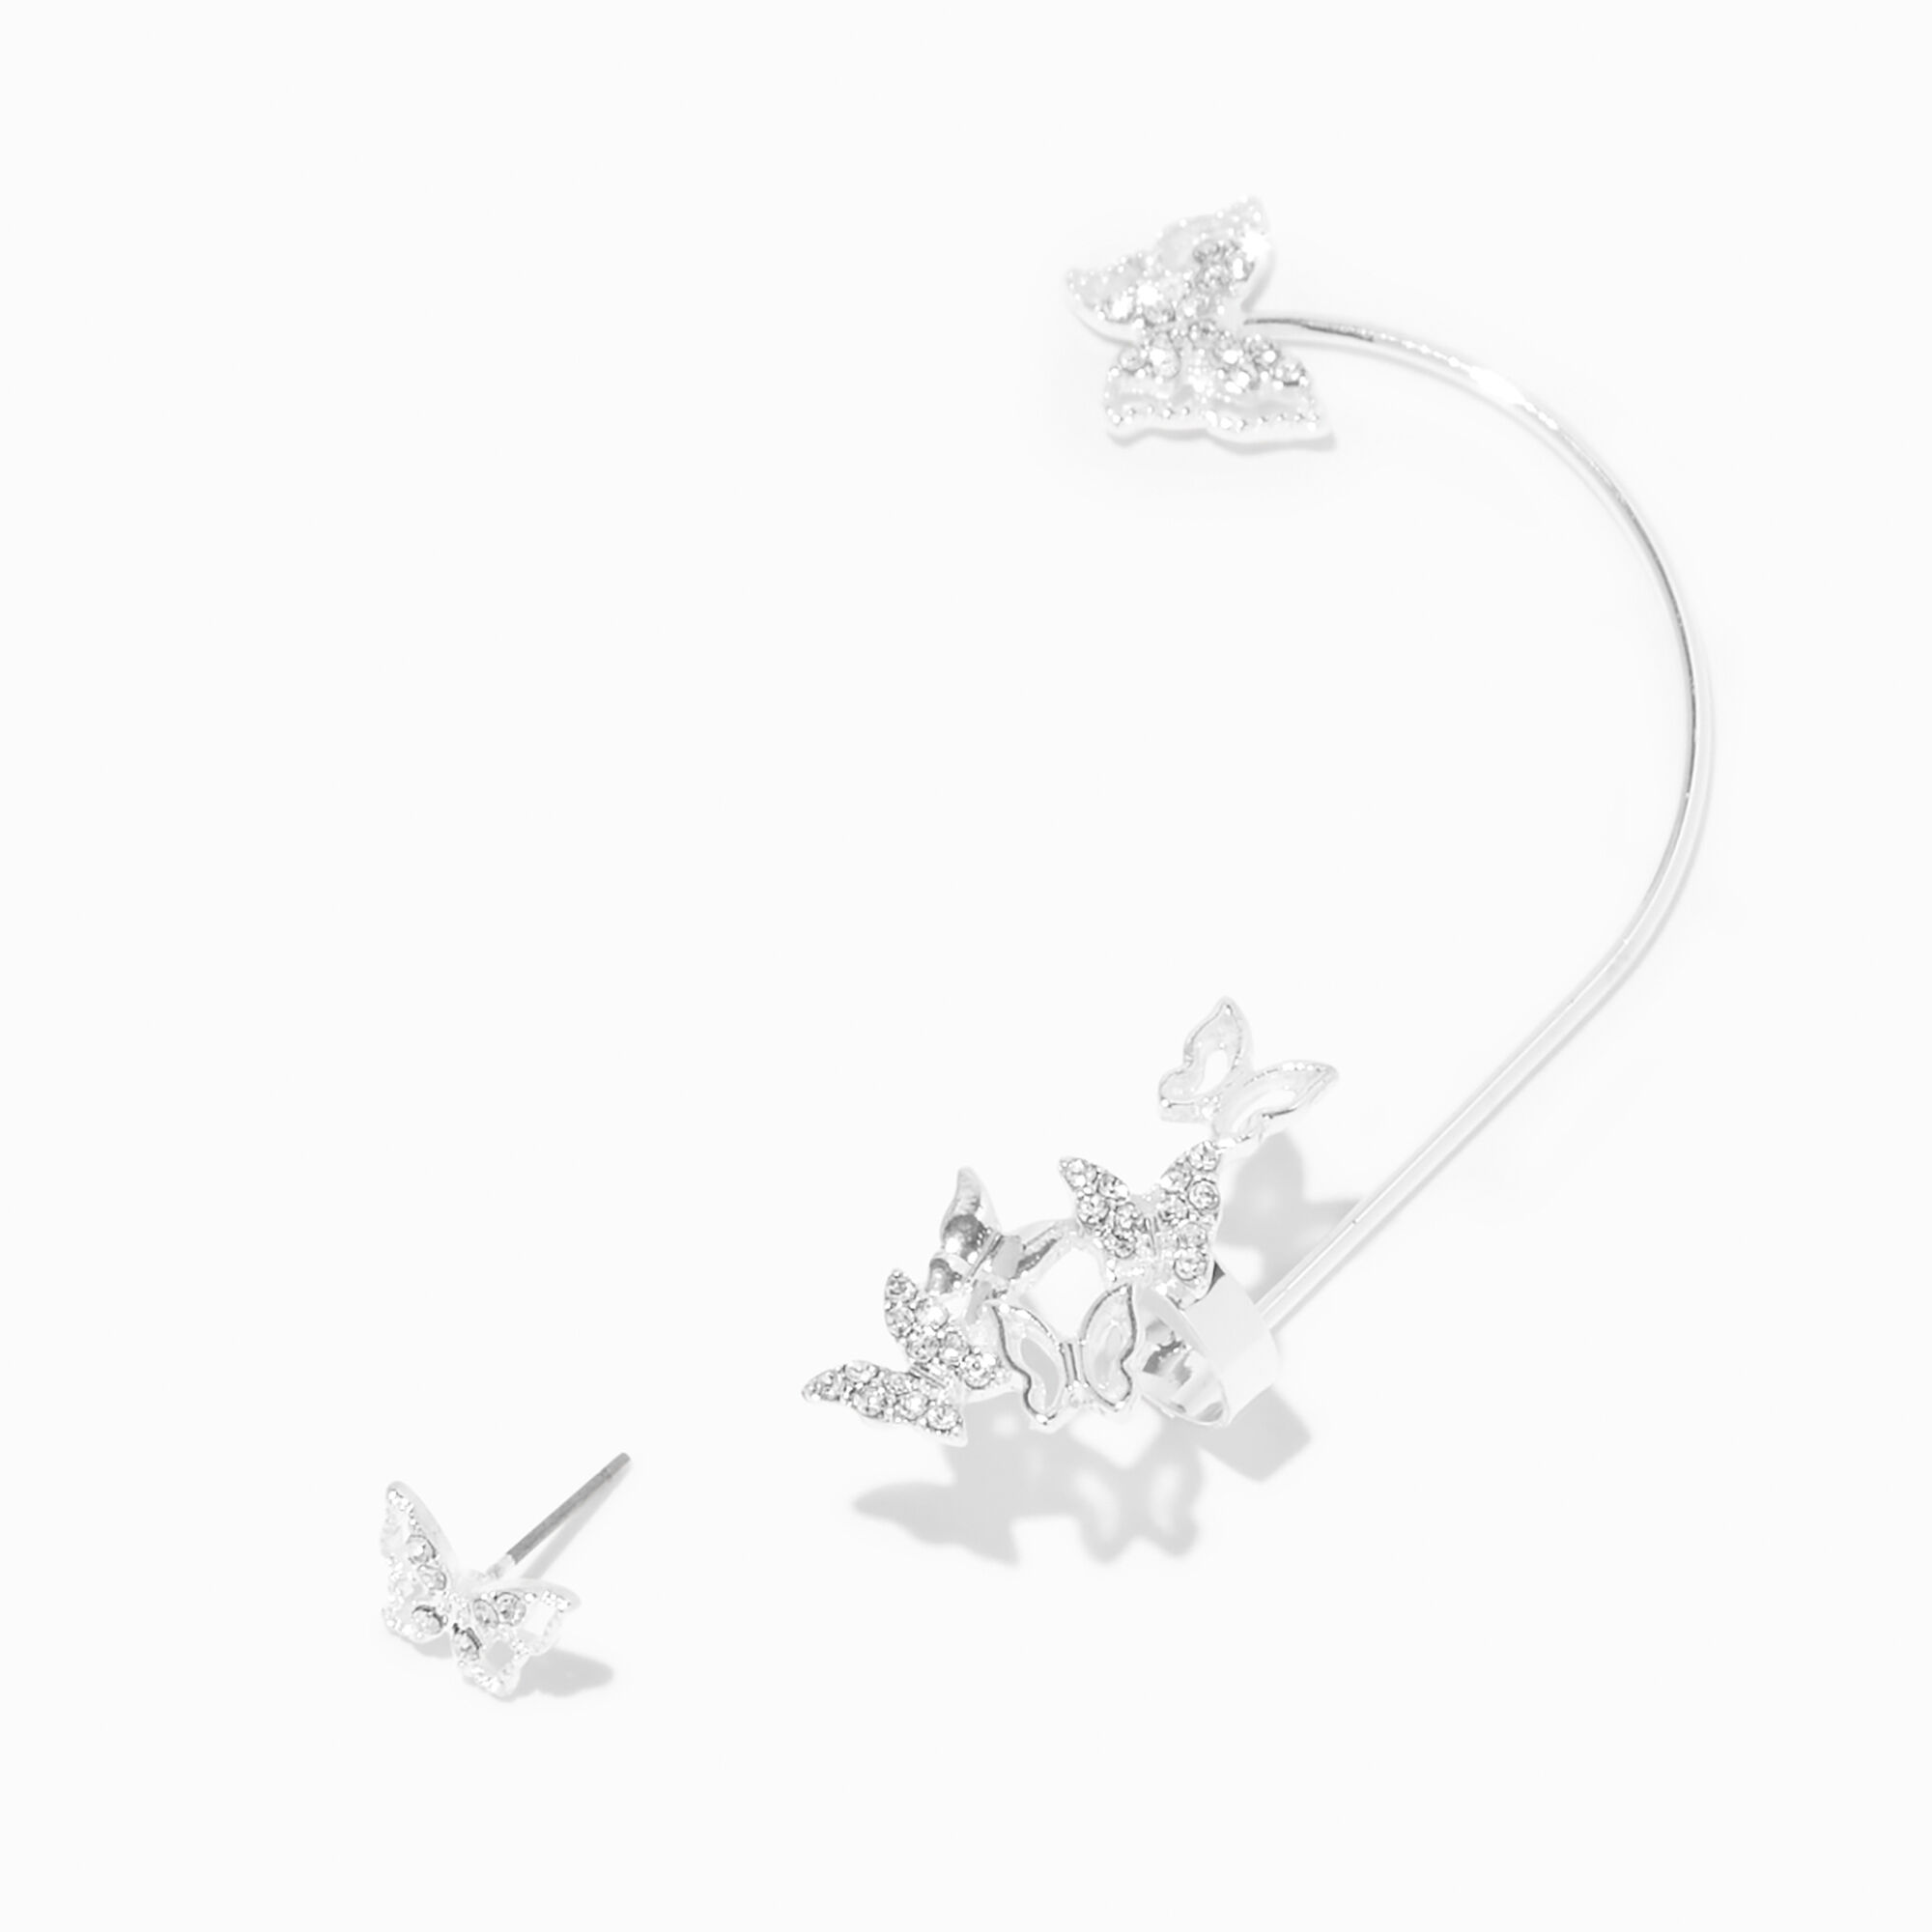 claire's silver-tone embellished butterfly ear cuff connector earring